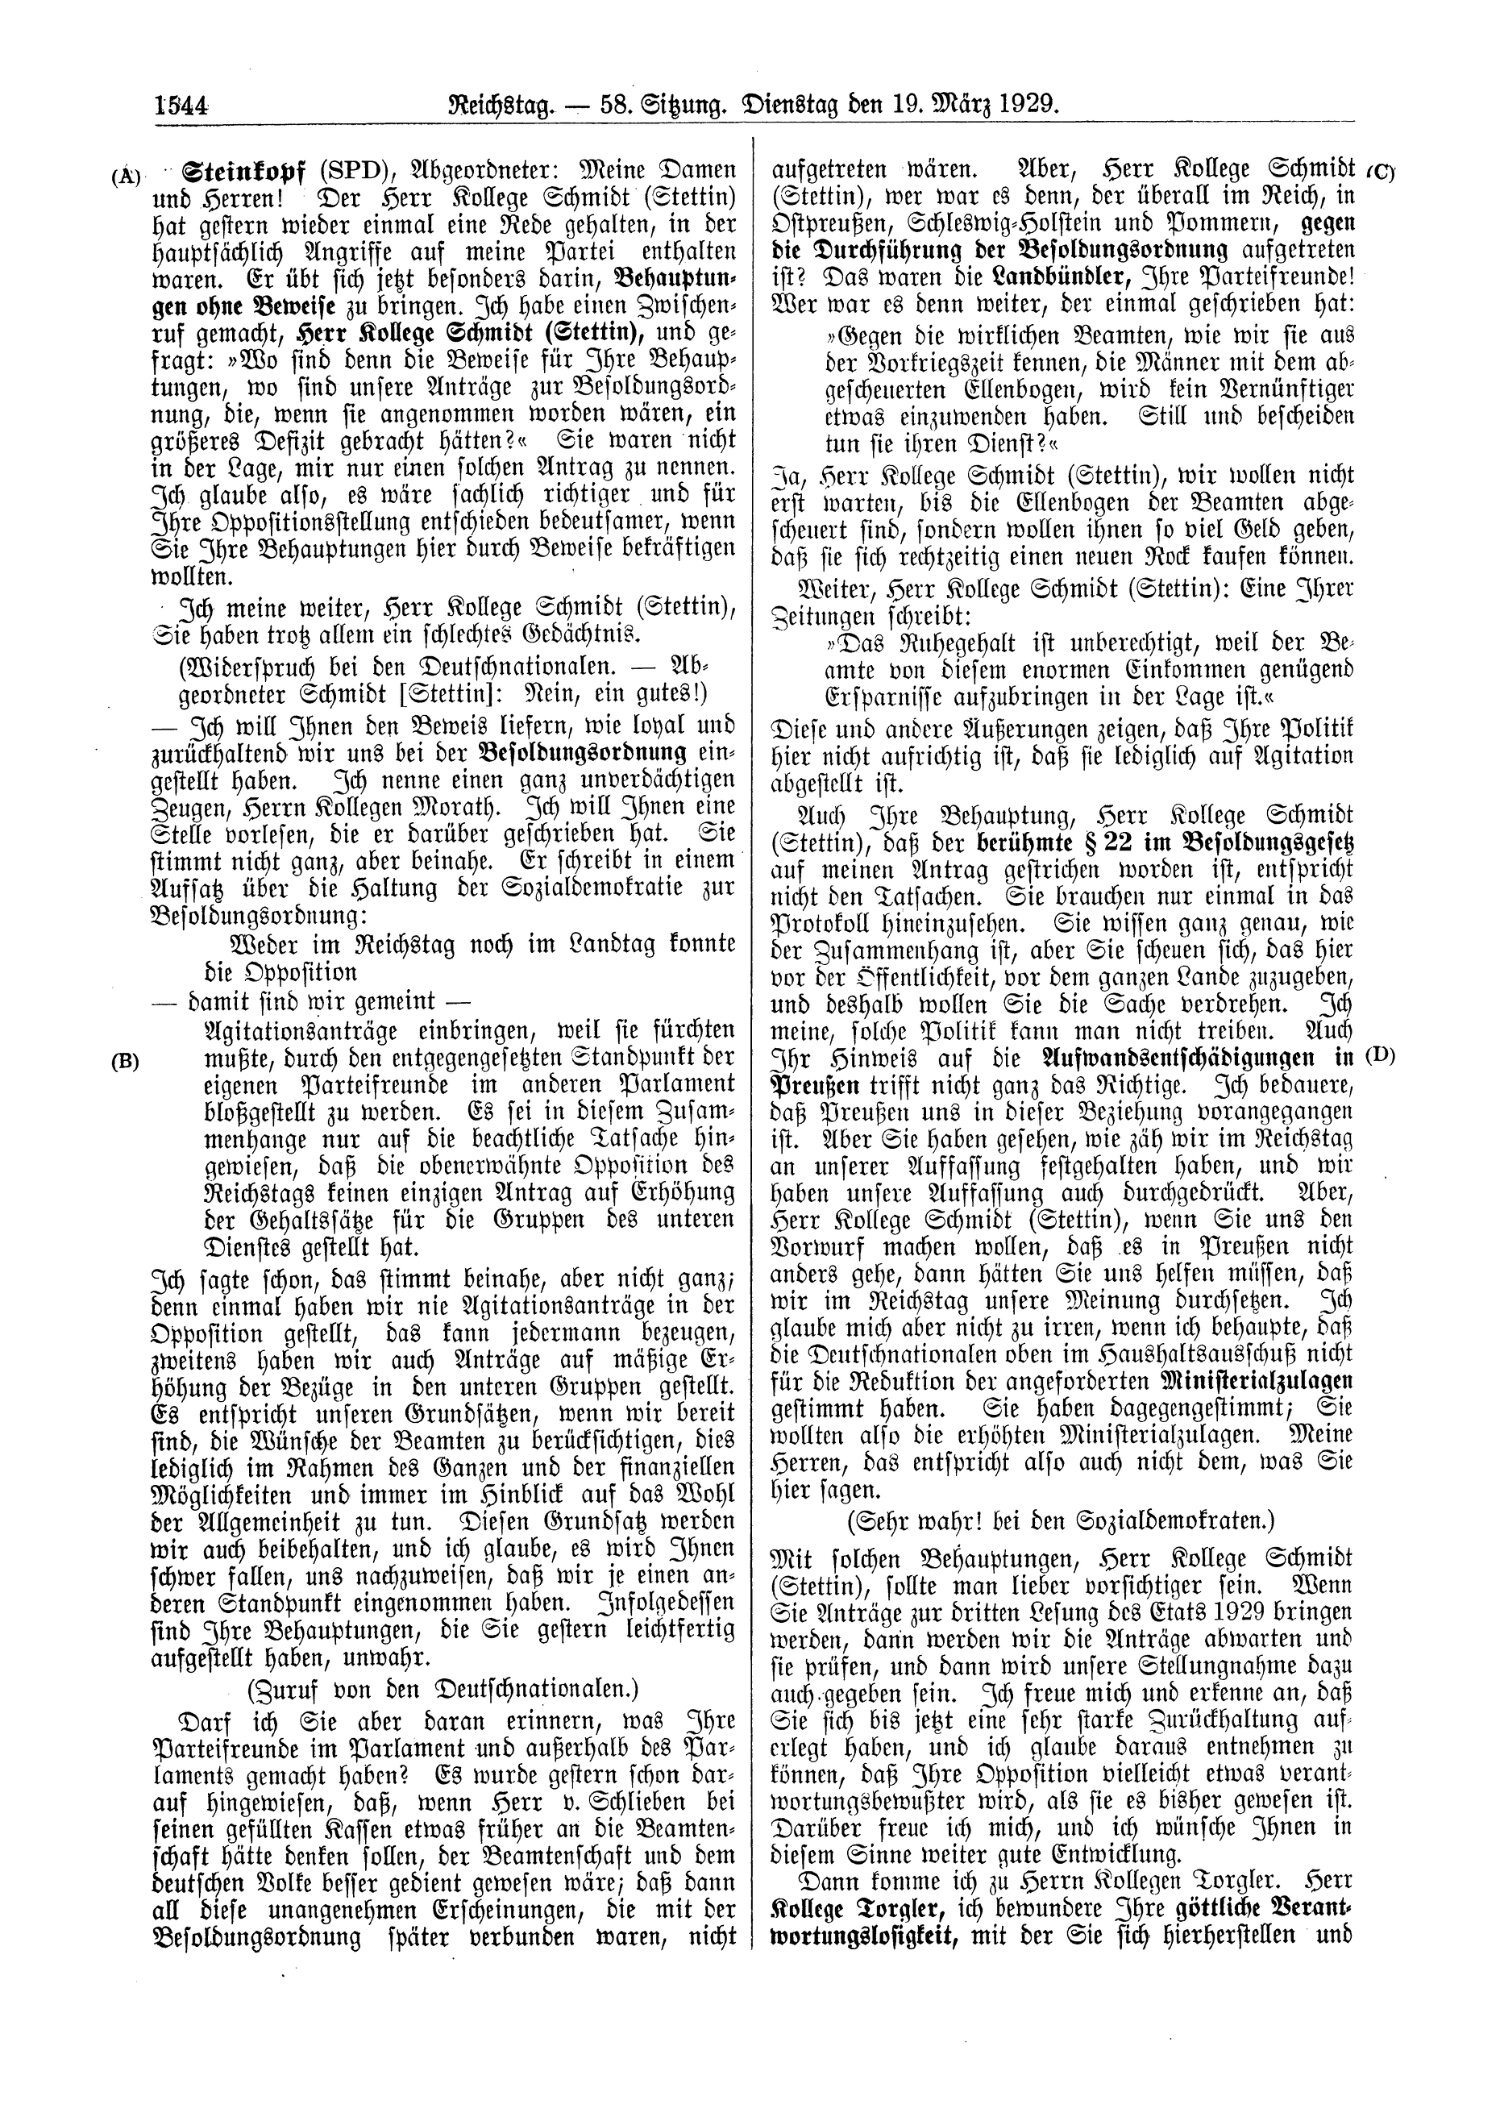 Scan of page 1544